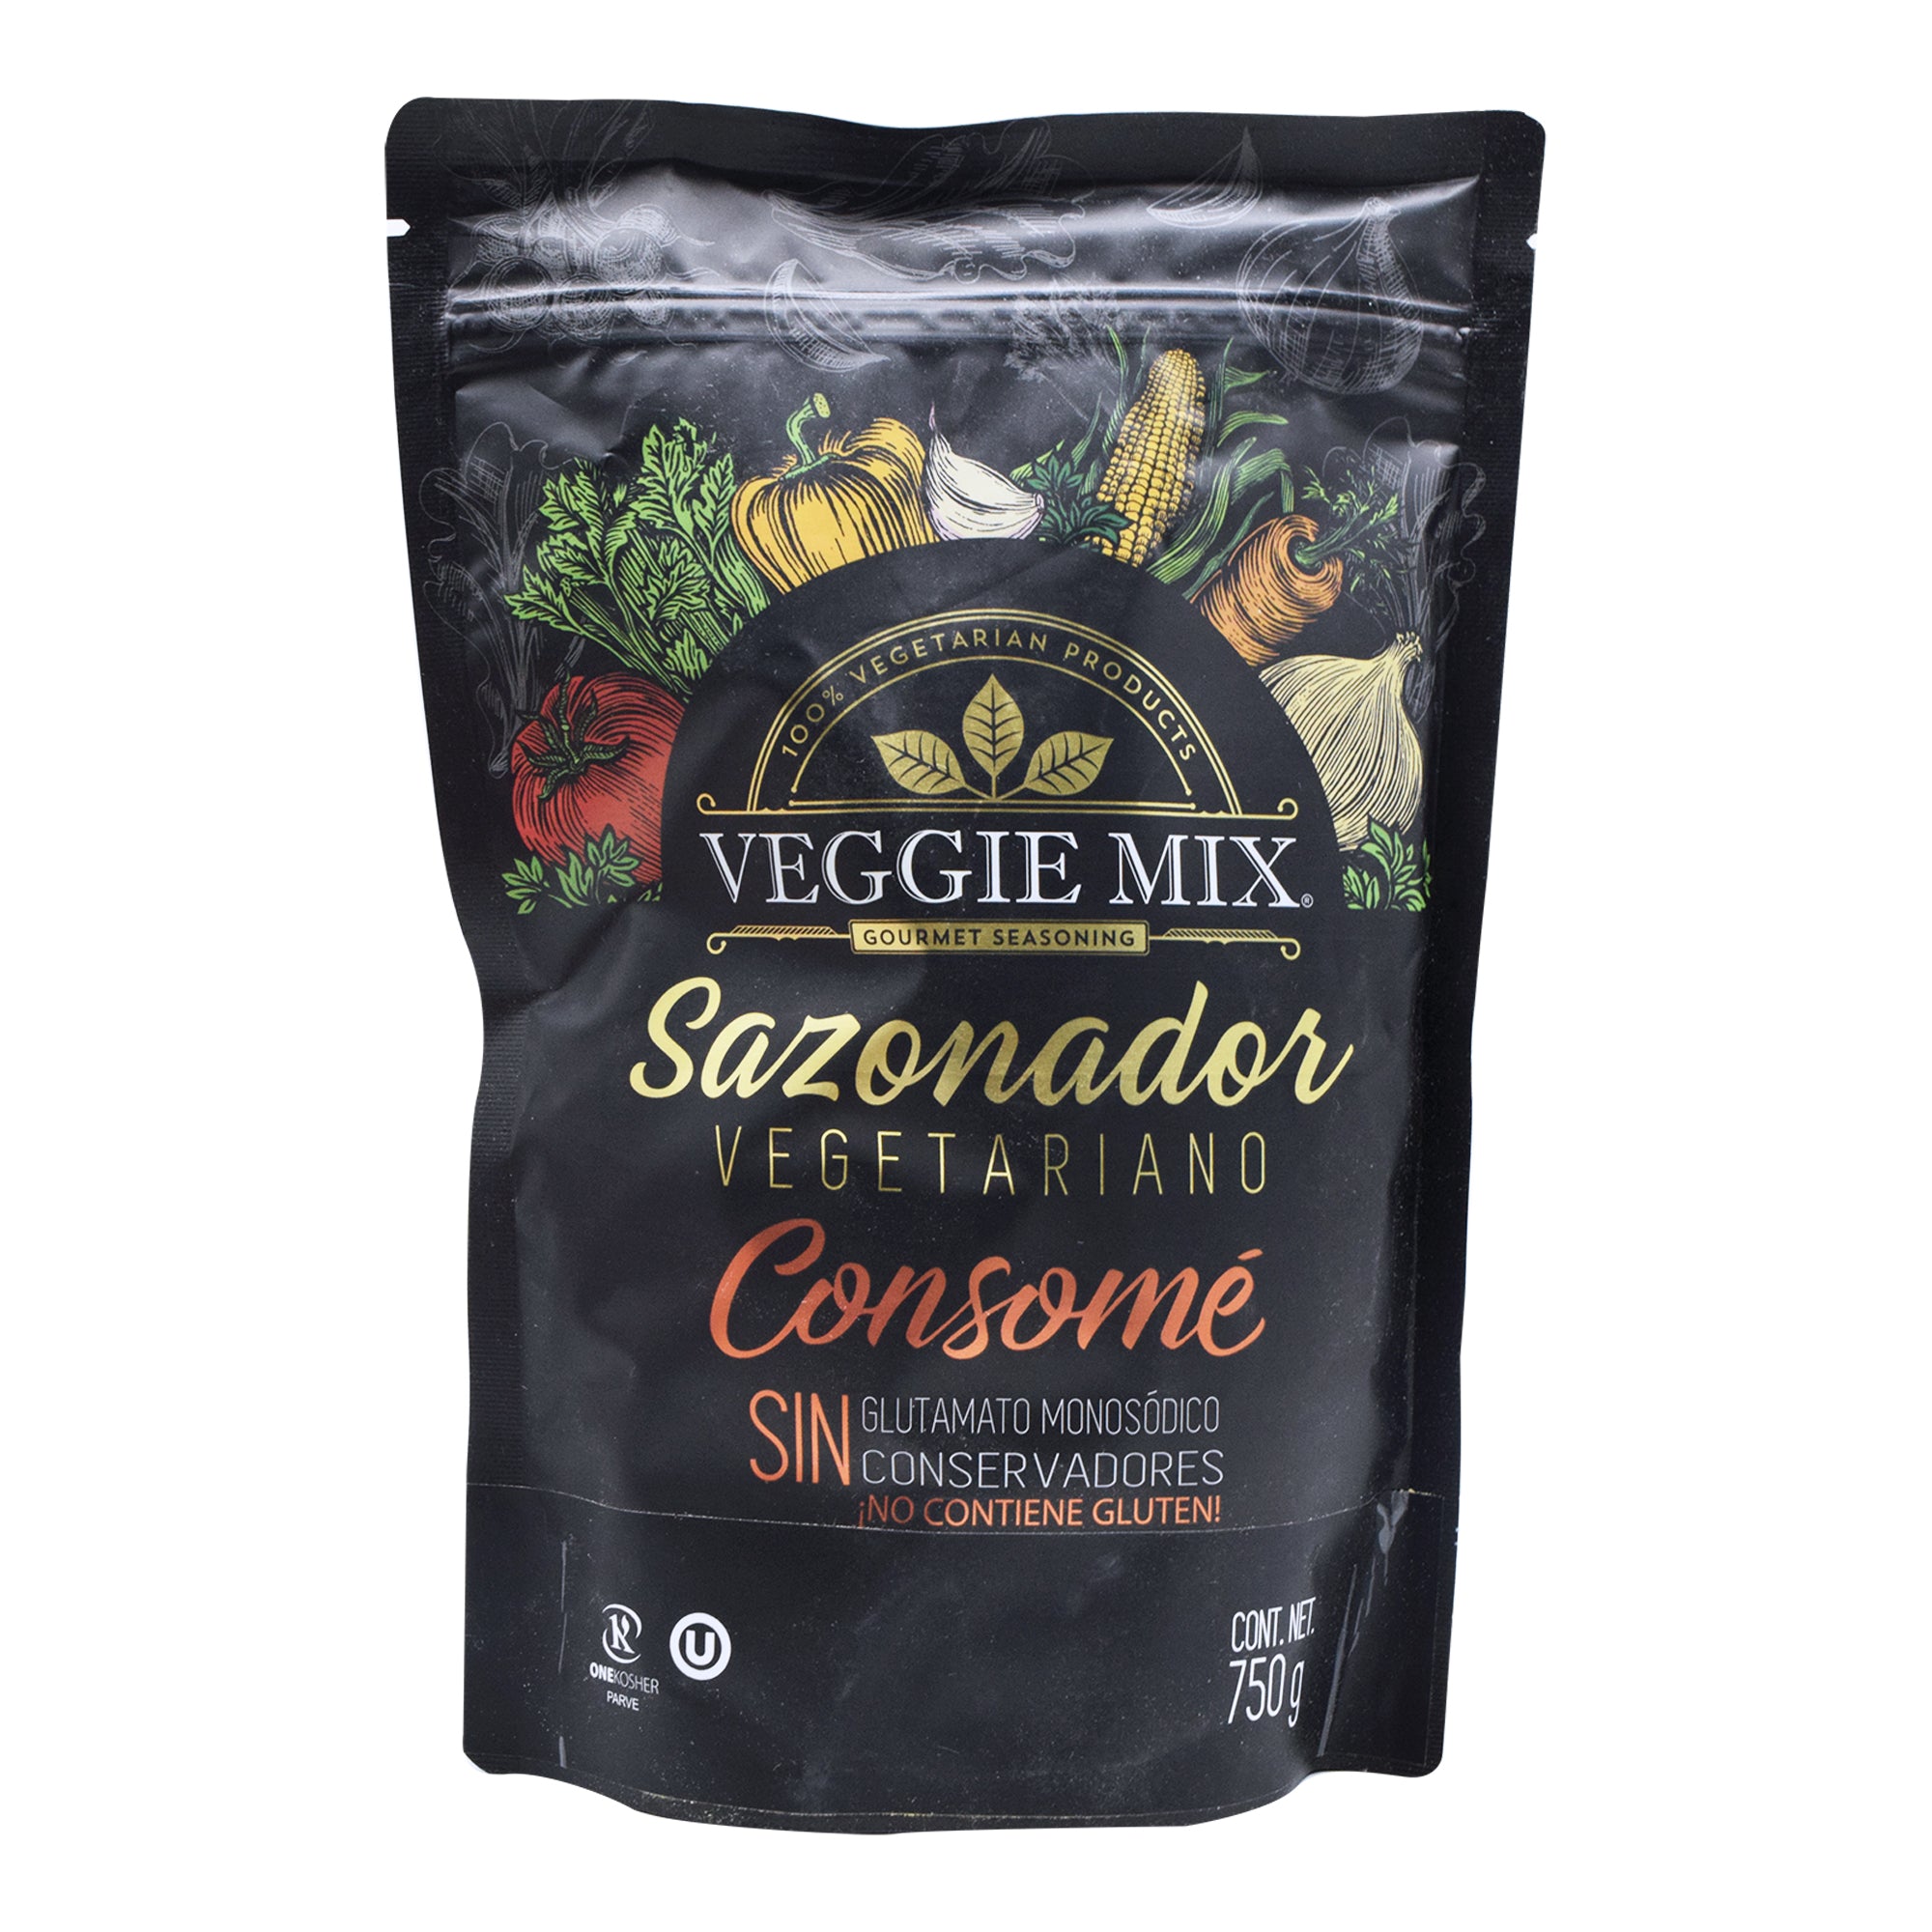 CONSOME VEGETARIANO 750 G